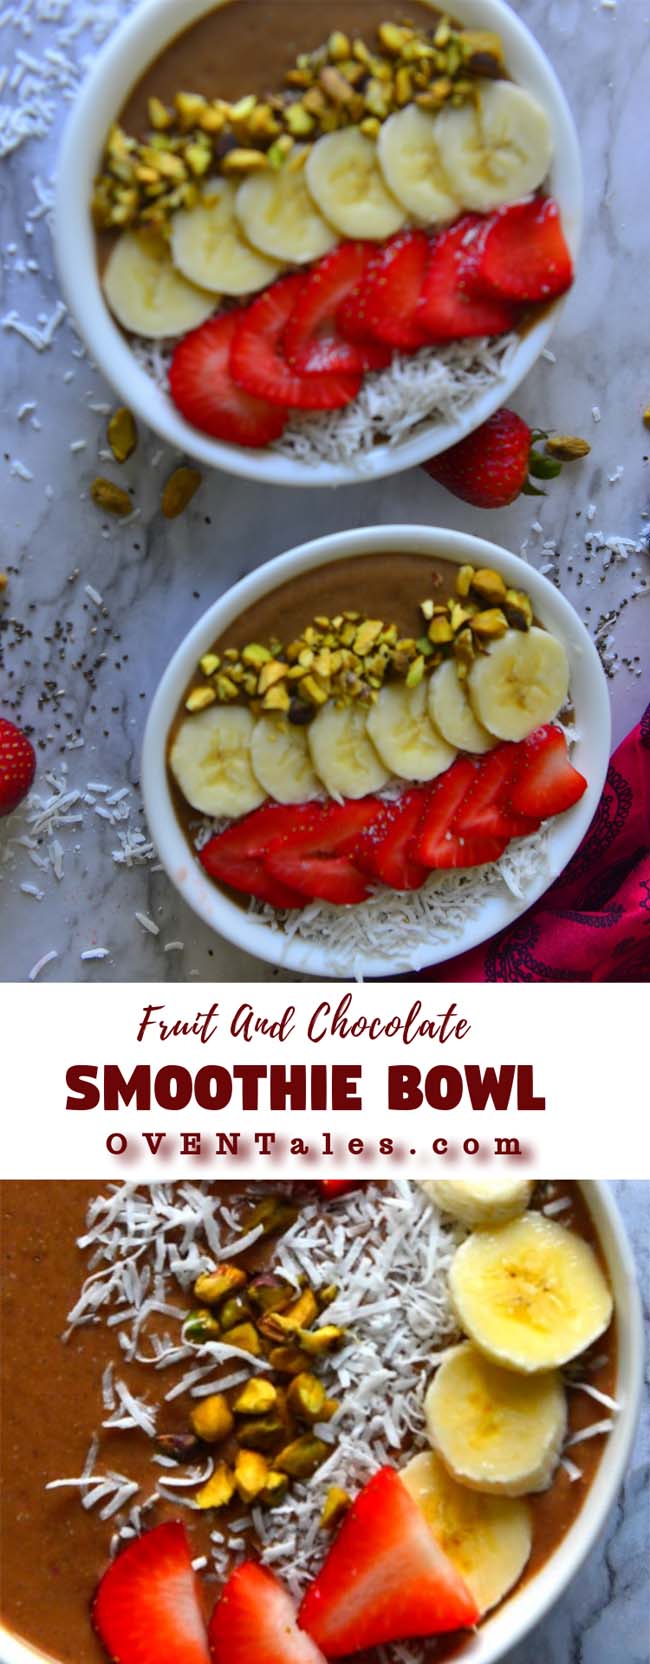 Fruit And Chocolate Smoothie Bowl